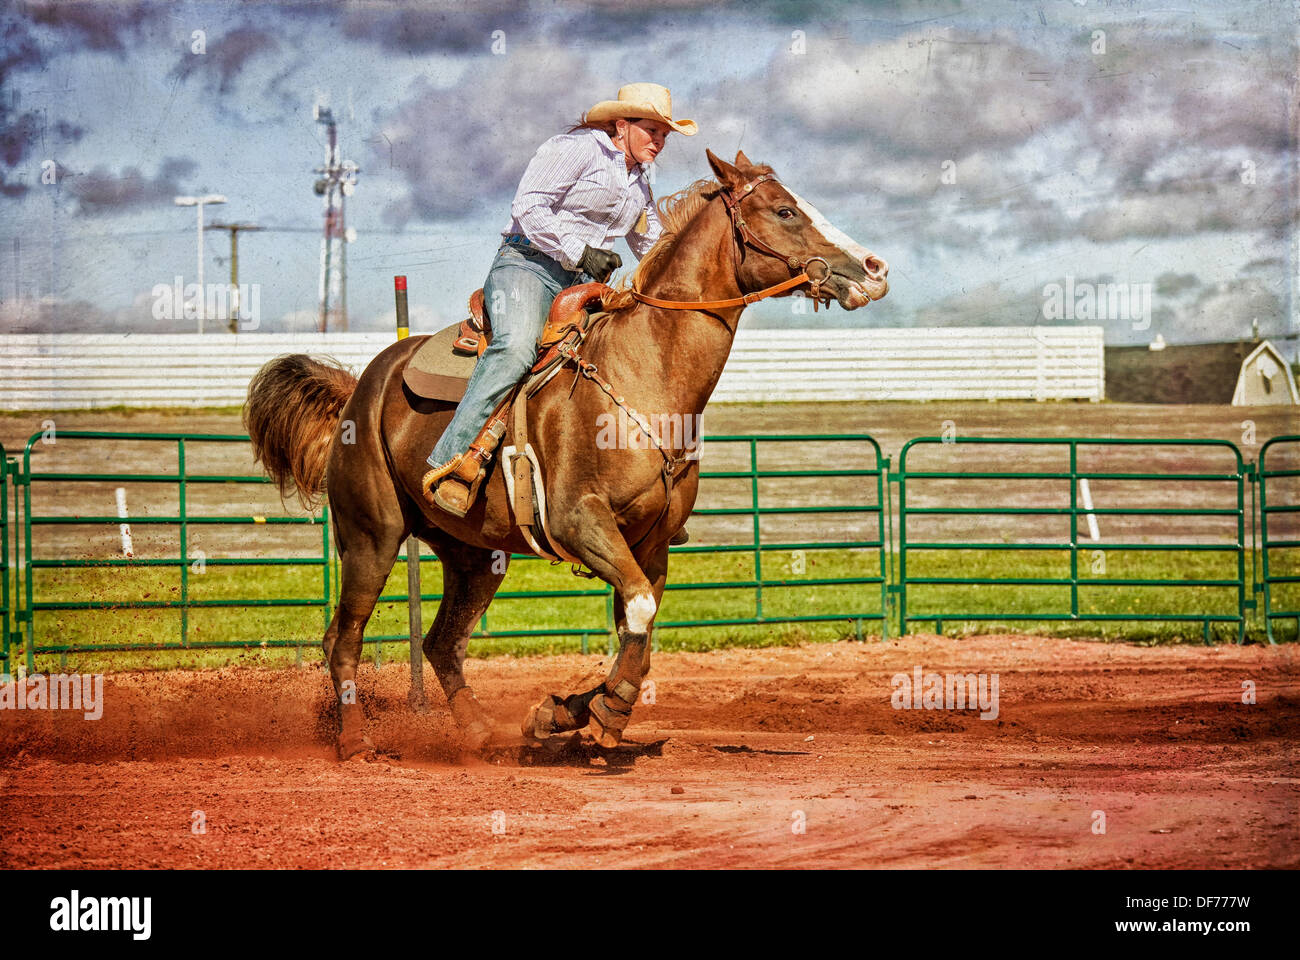 Western horse and rider competing in pole bending and barrel racing competition with texture. Stock Photo